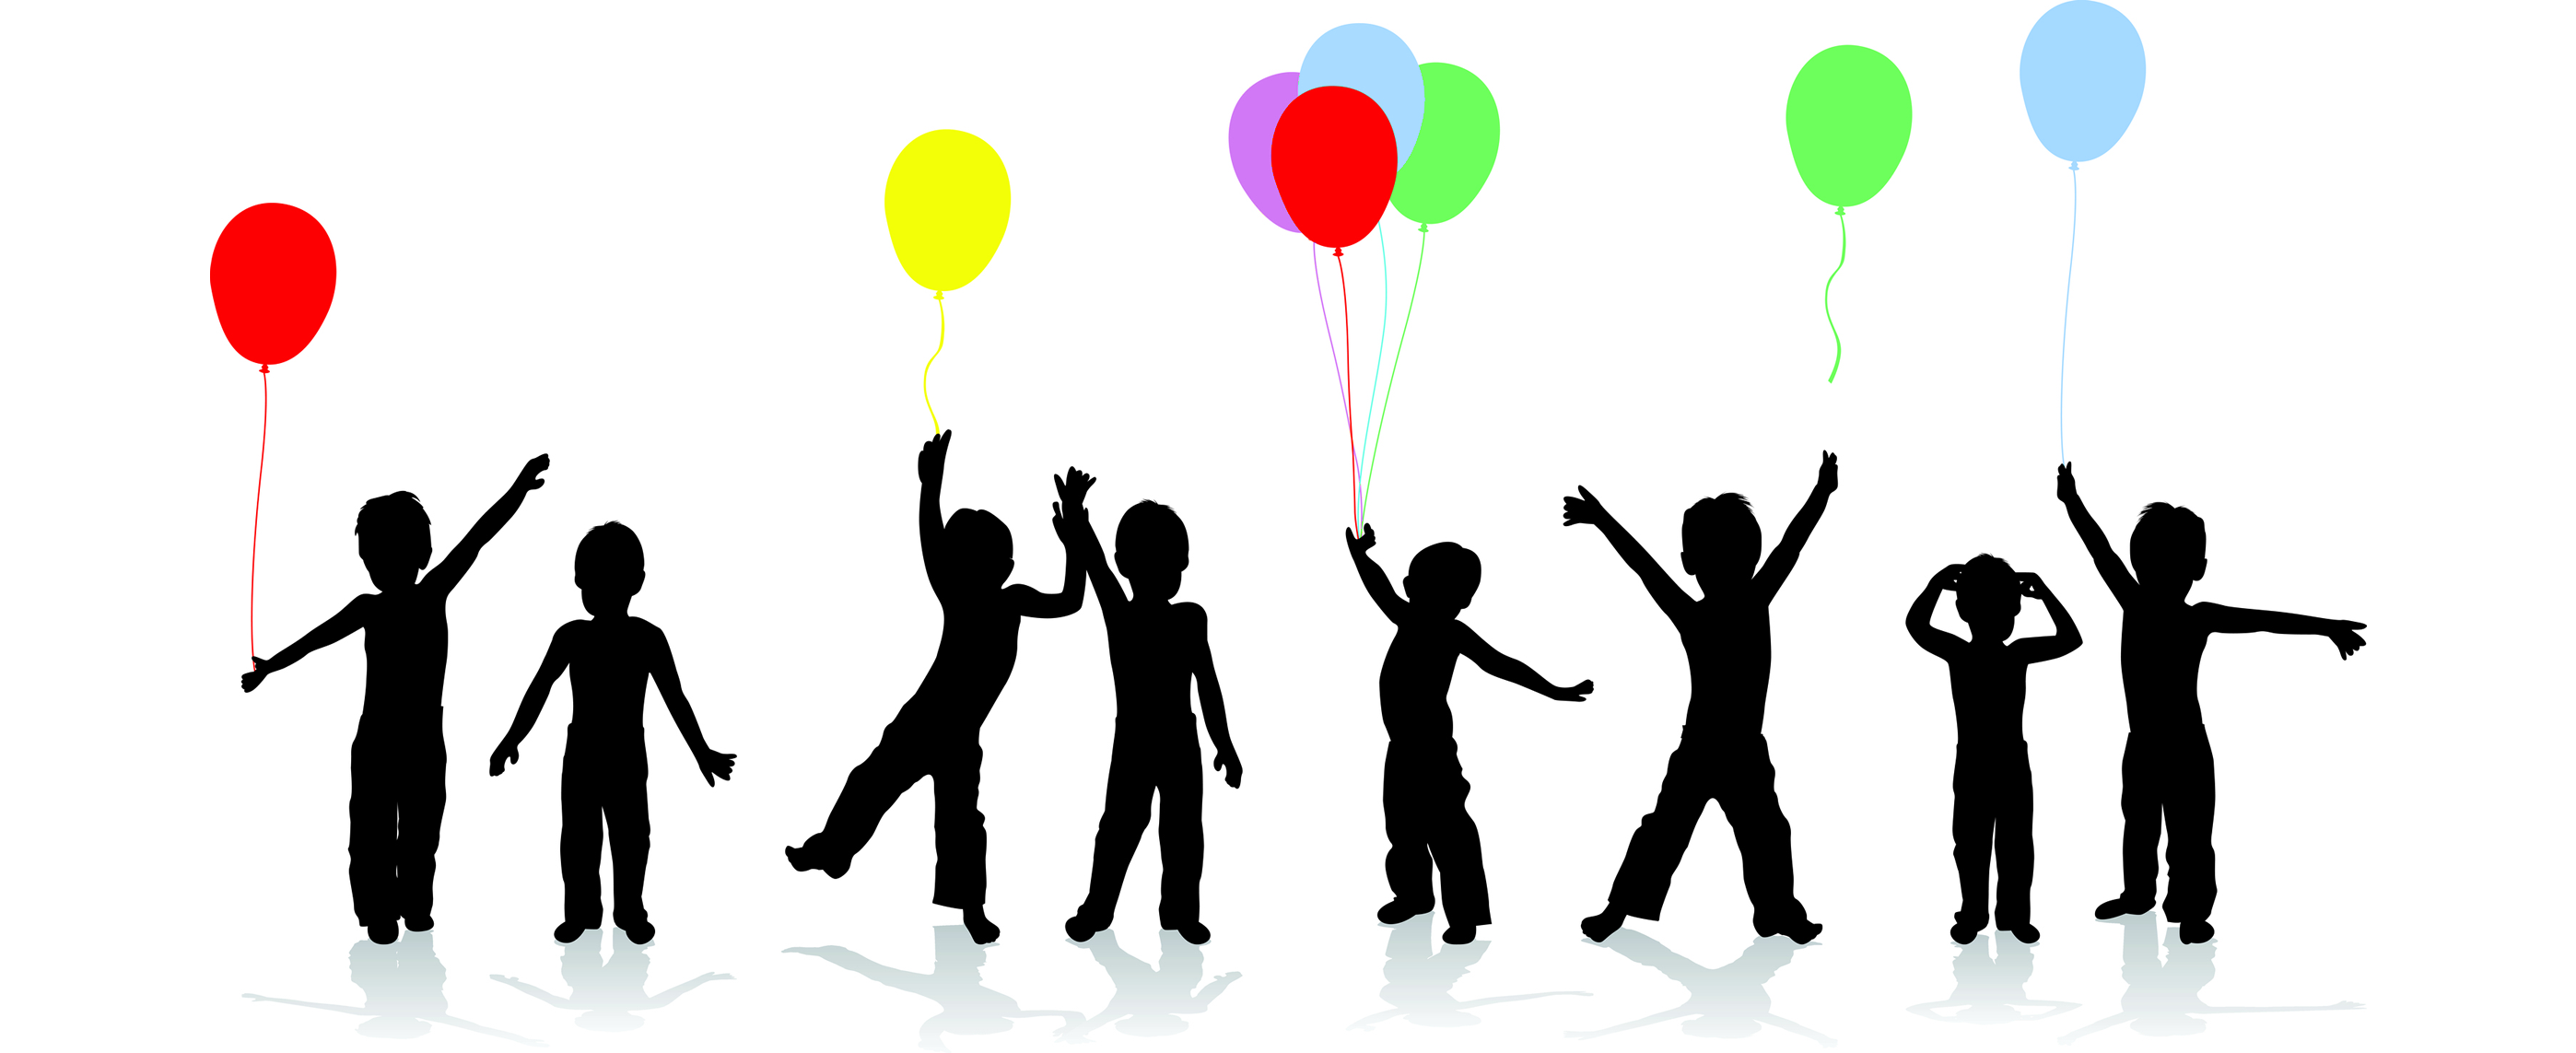 Children in a row with balloons